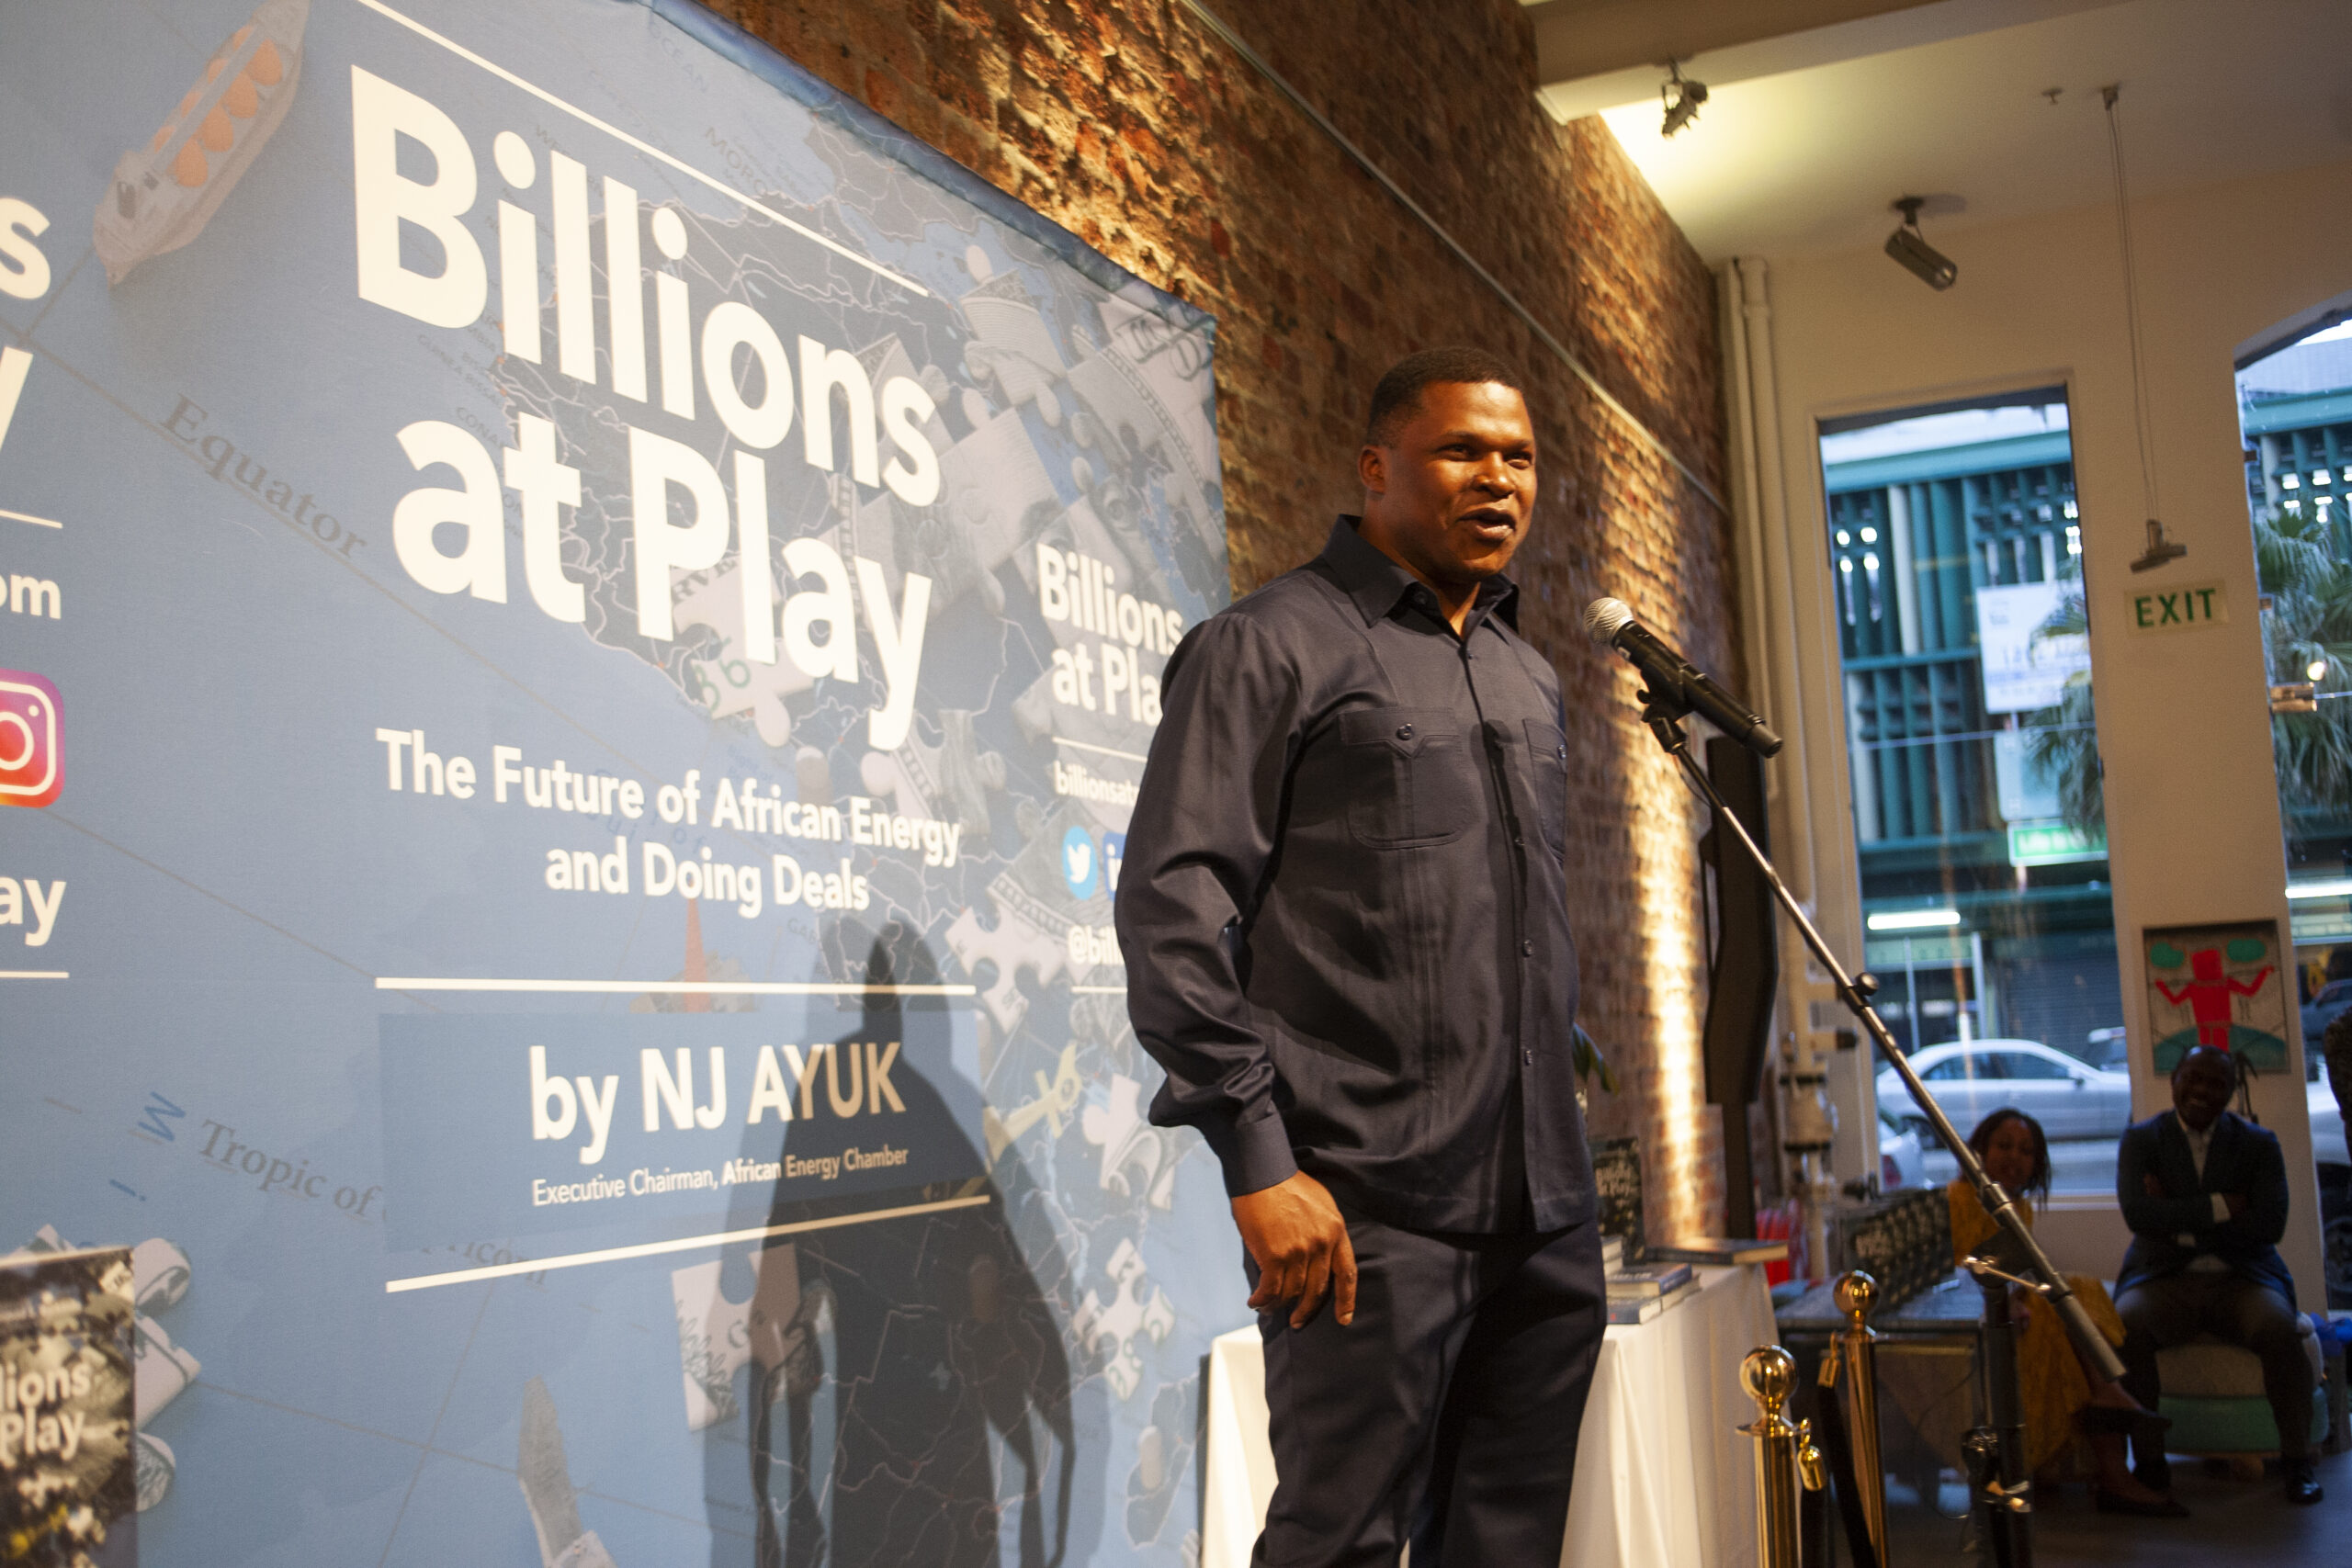 NJ Ayuk speaking at the launch of Billions At Play in South Africa